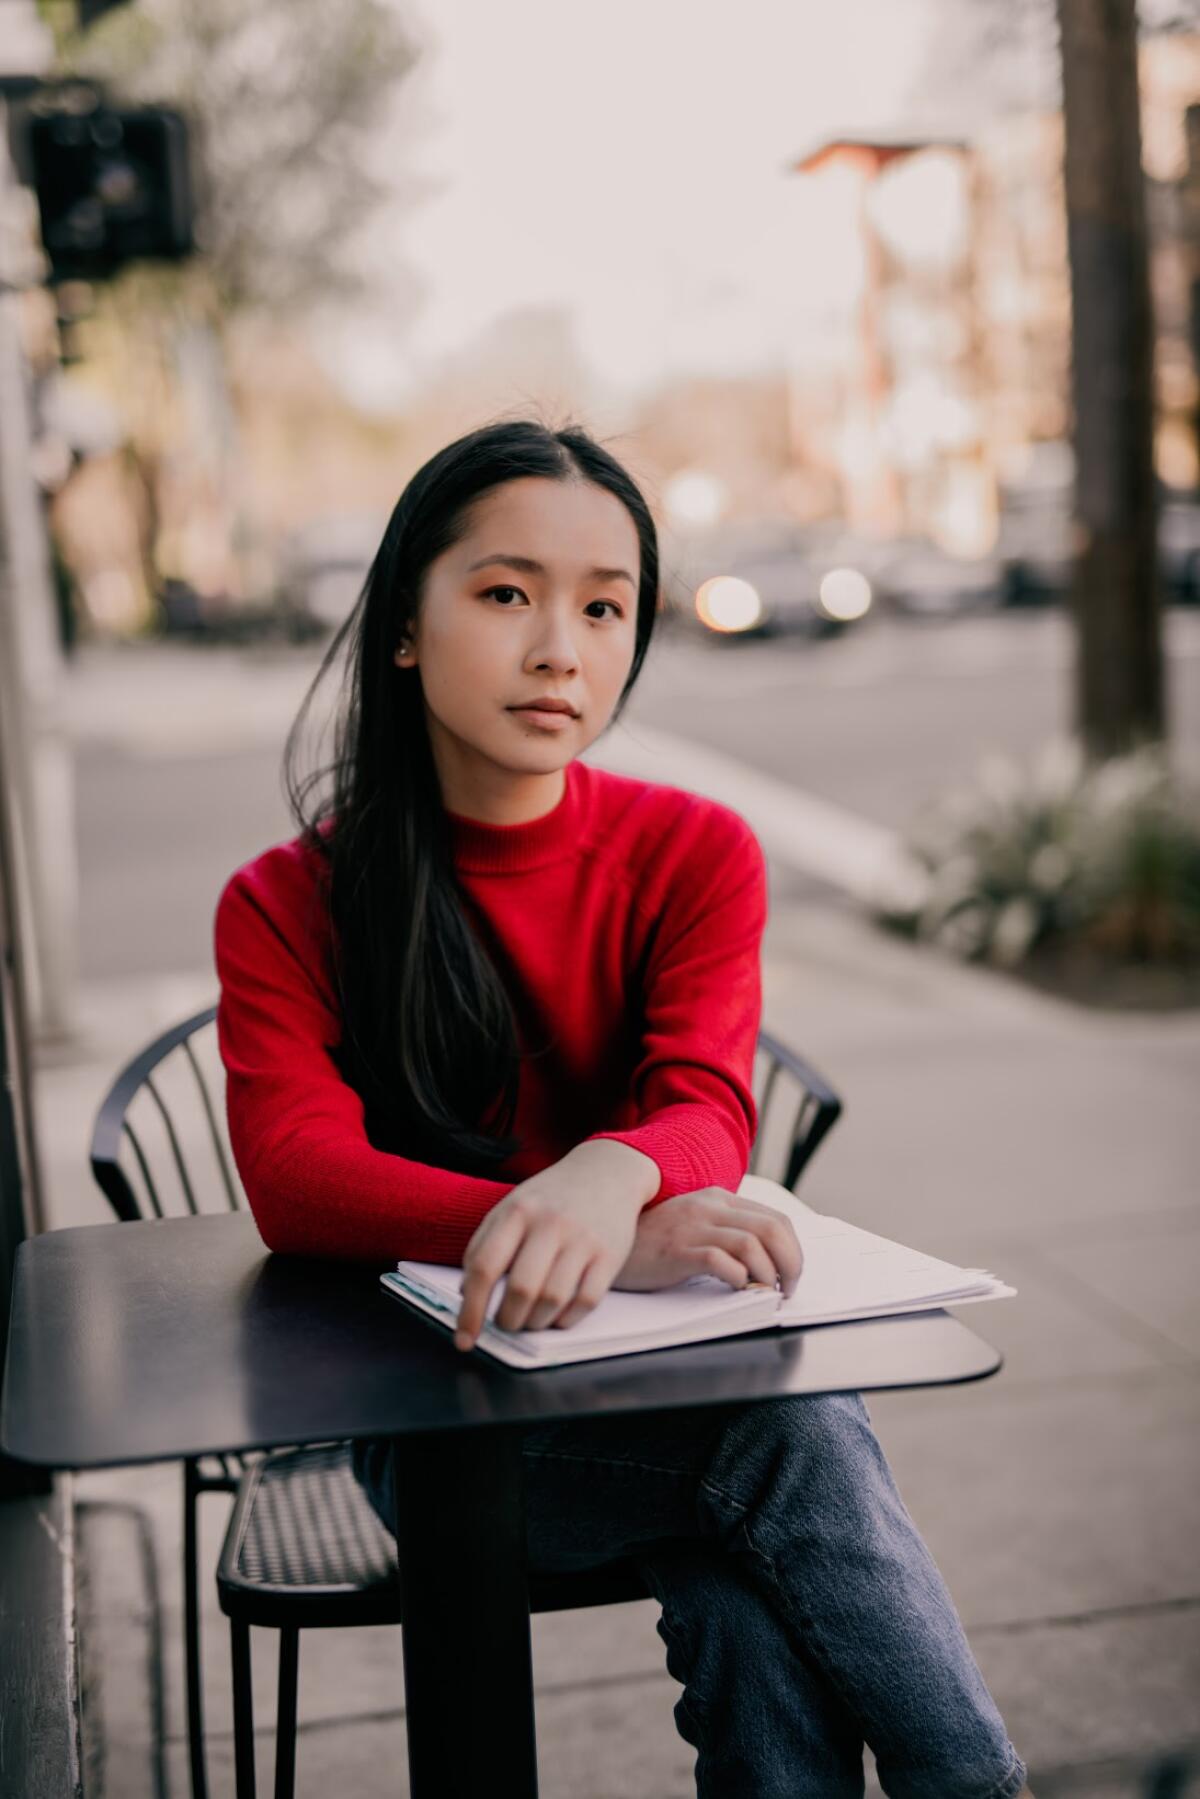 A young woman sits at a cafe table on a sidewalk, hands folded over a notebook.